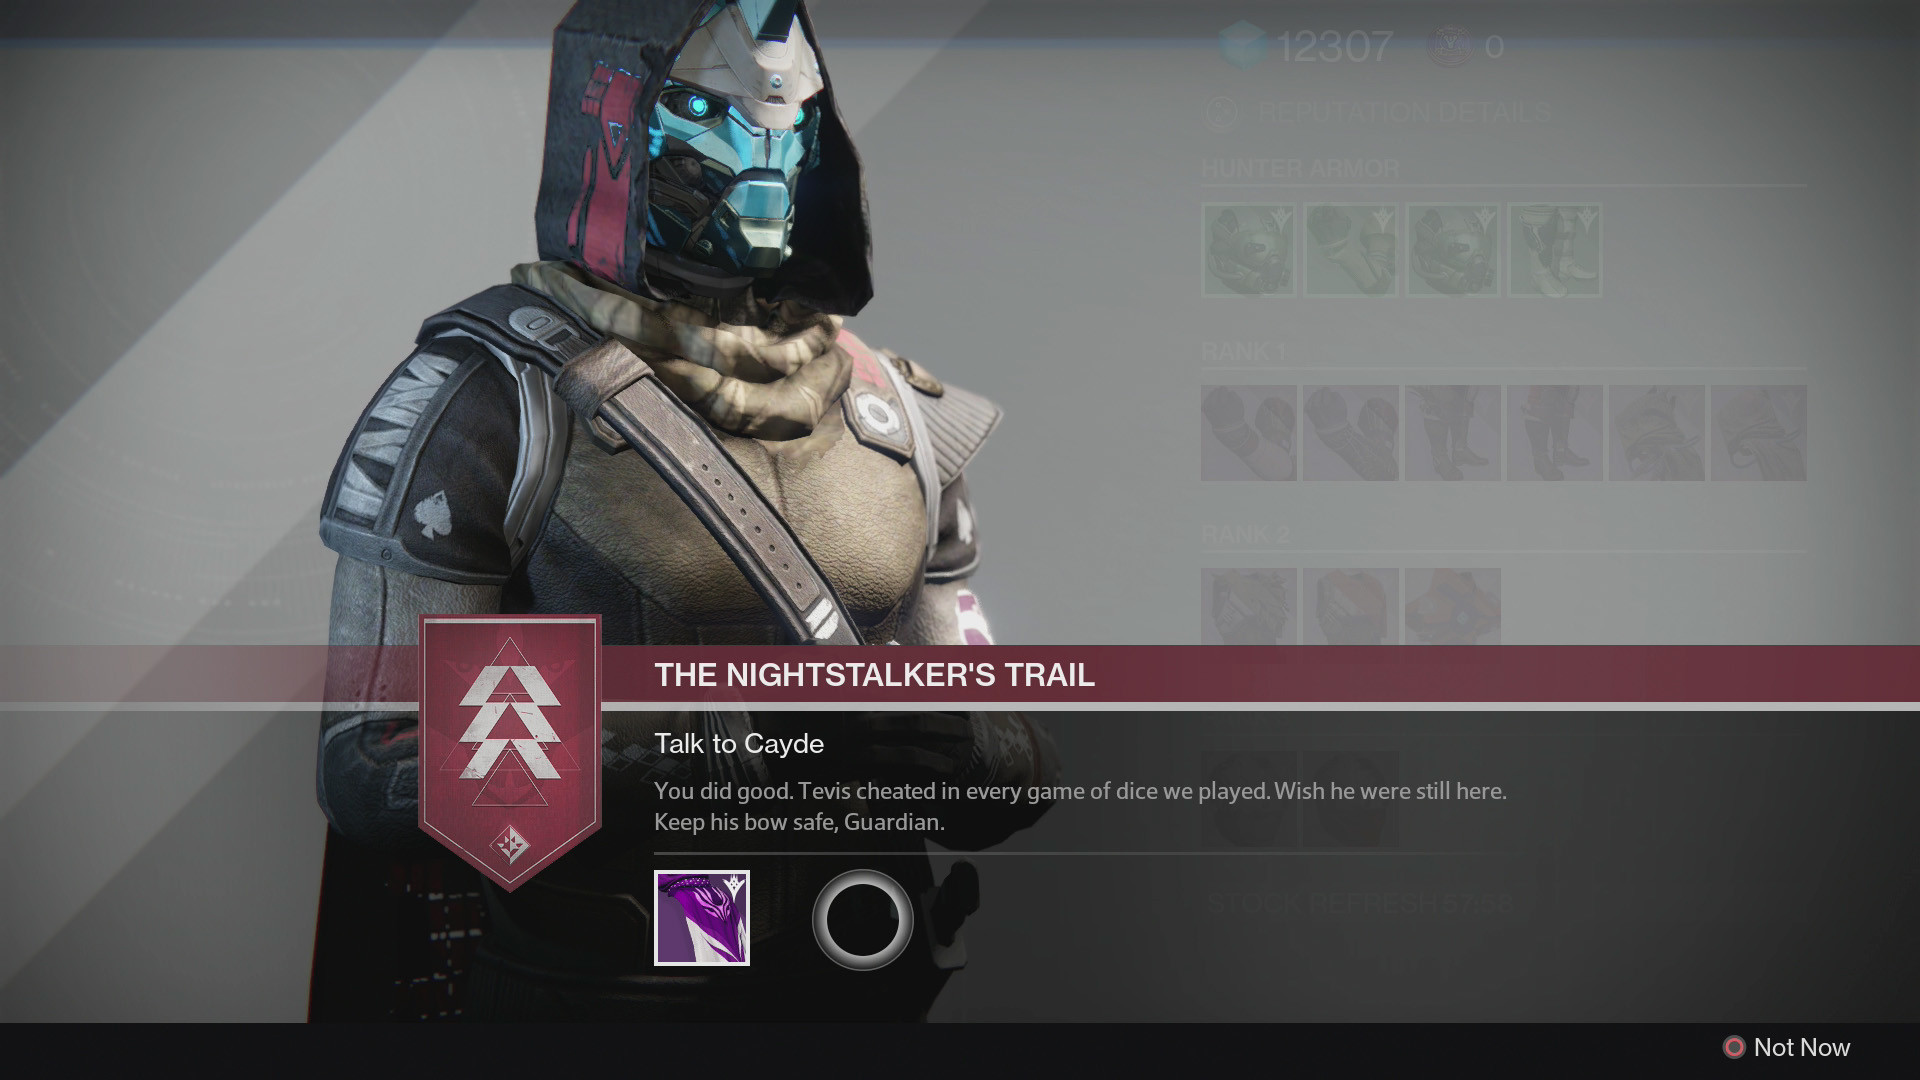 1920x1080 When the quest is done, grab the Nightstalker's Cloak from Cade-6.